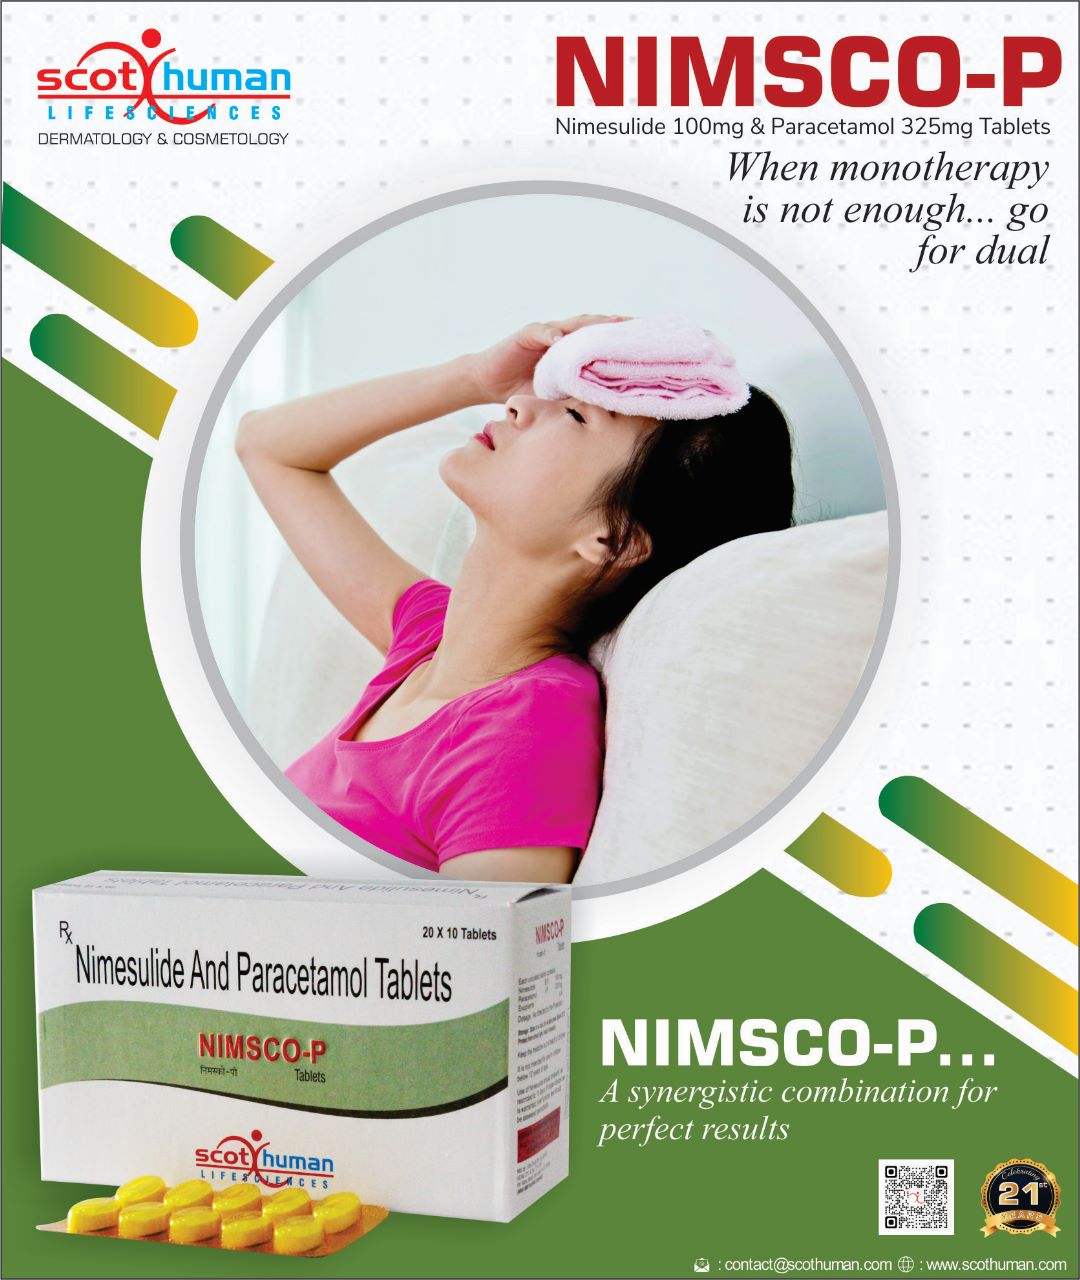 Product Name: Nimsco P, Compositions of Nimsco P are Nimesulide and Paracetamol Tablets - Pharma Drugs and Chemicals